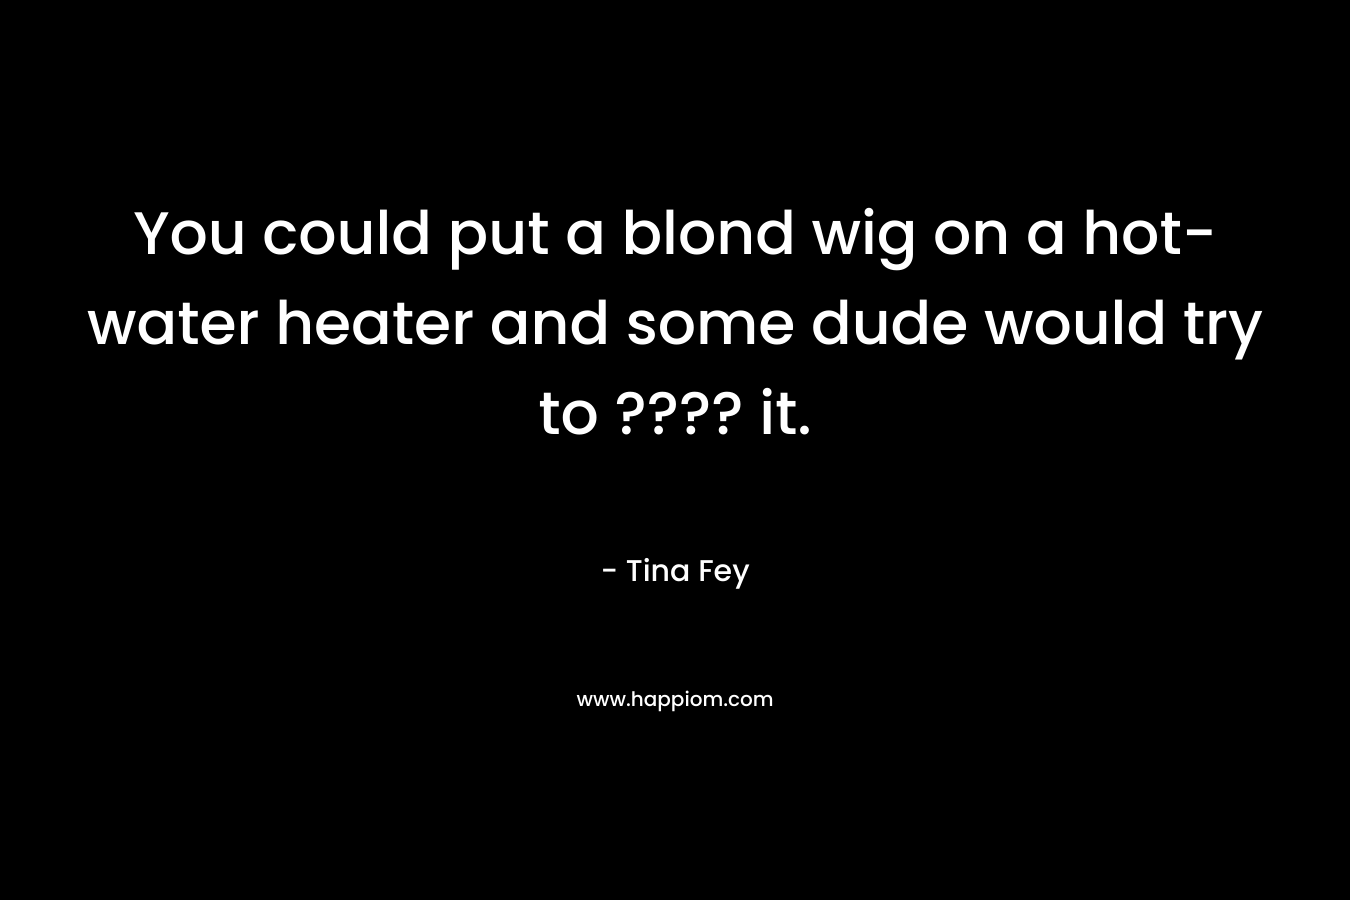 You could put a blond wig on a hot-water heater and some dude would try to ???? it. – Tina Fey